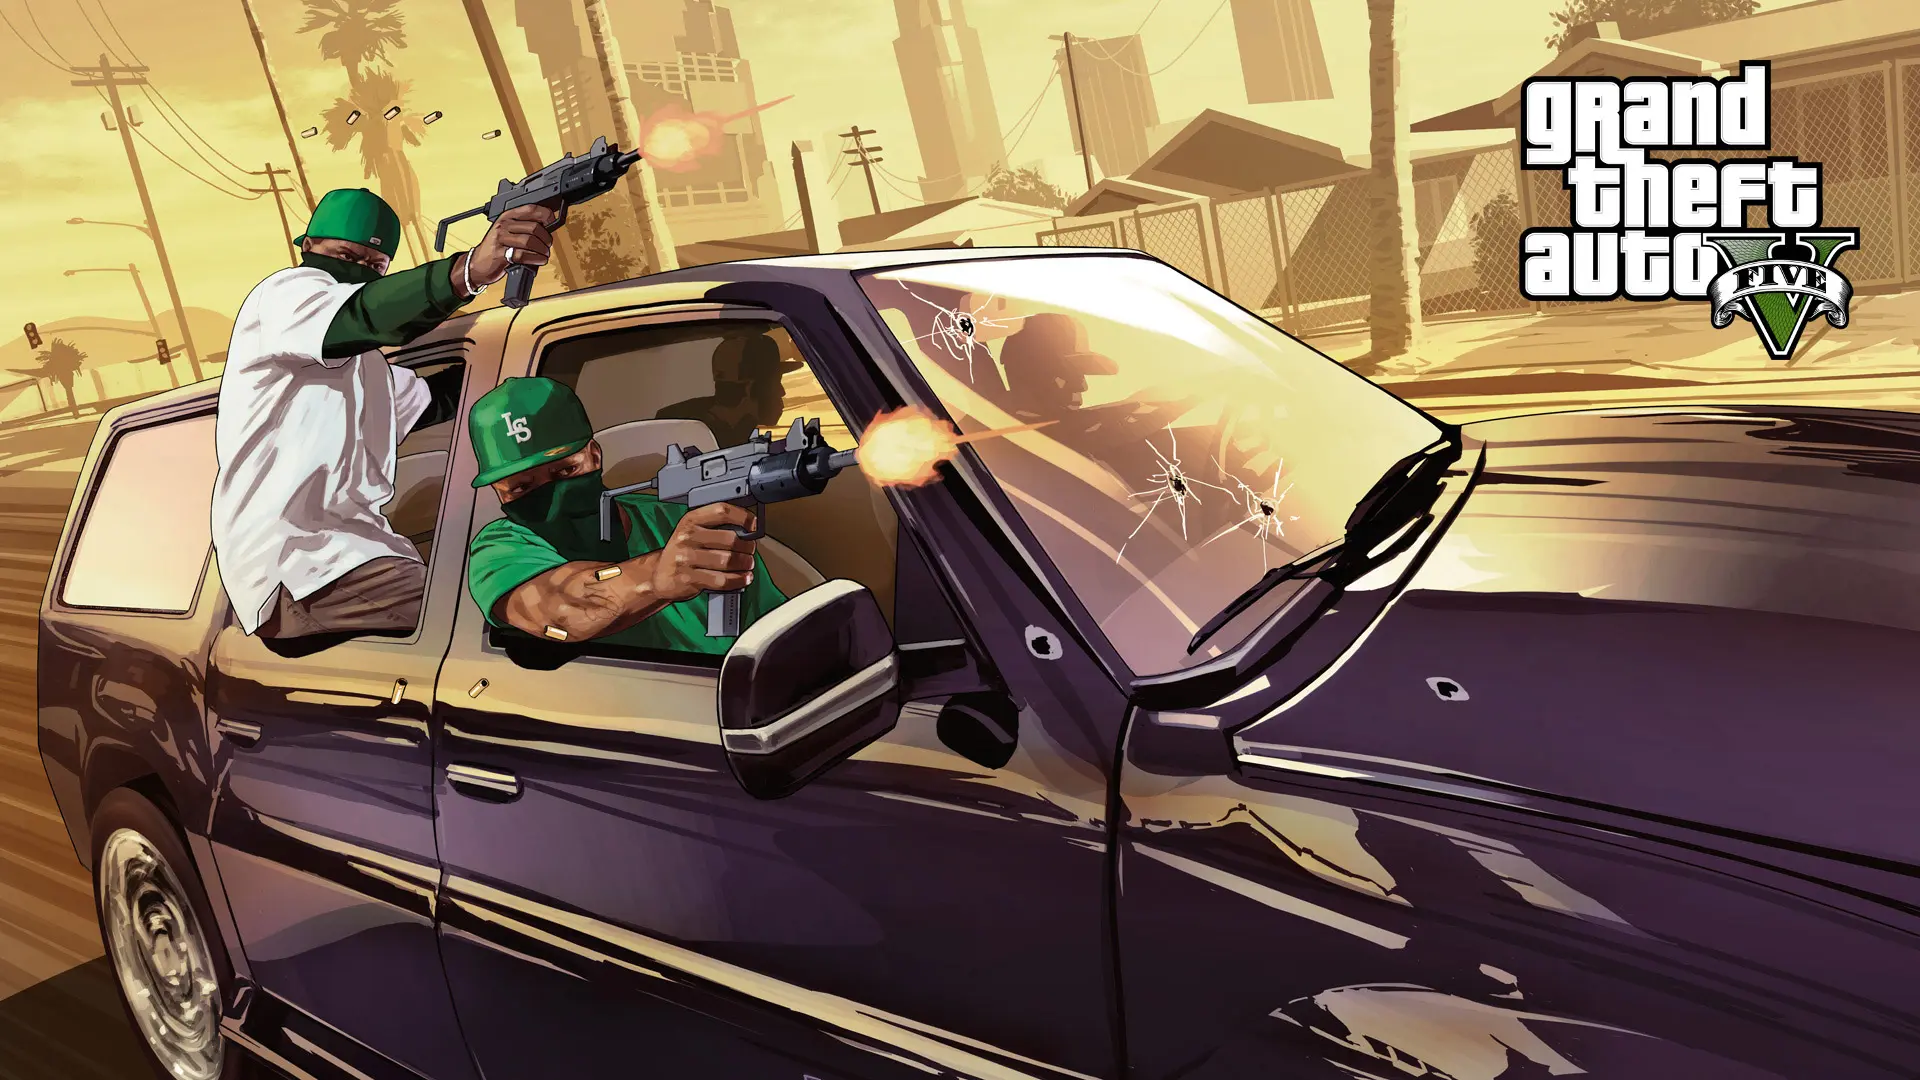 Game Grand Theft Auto 5 wallpaper 17 | Background Image